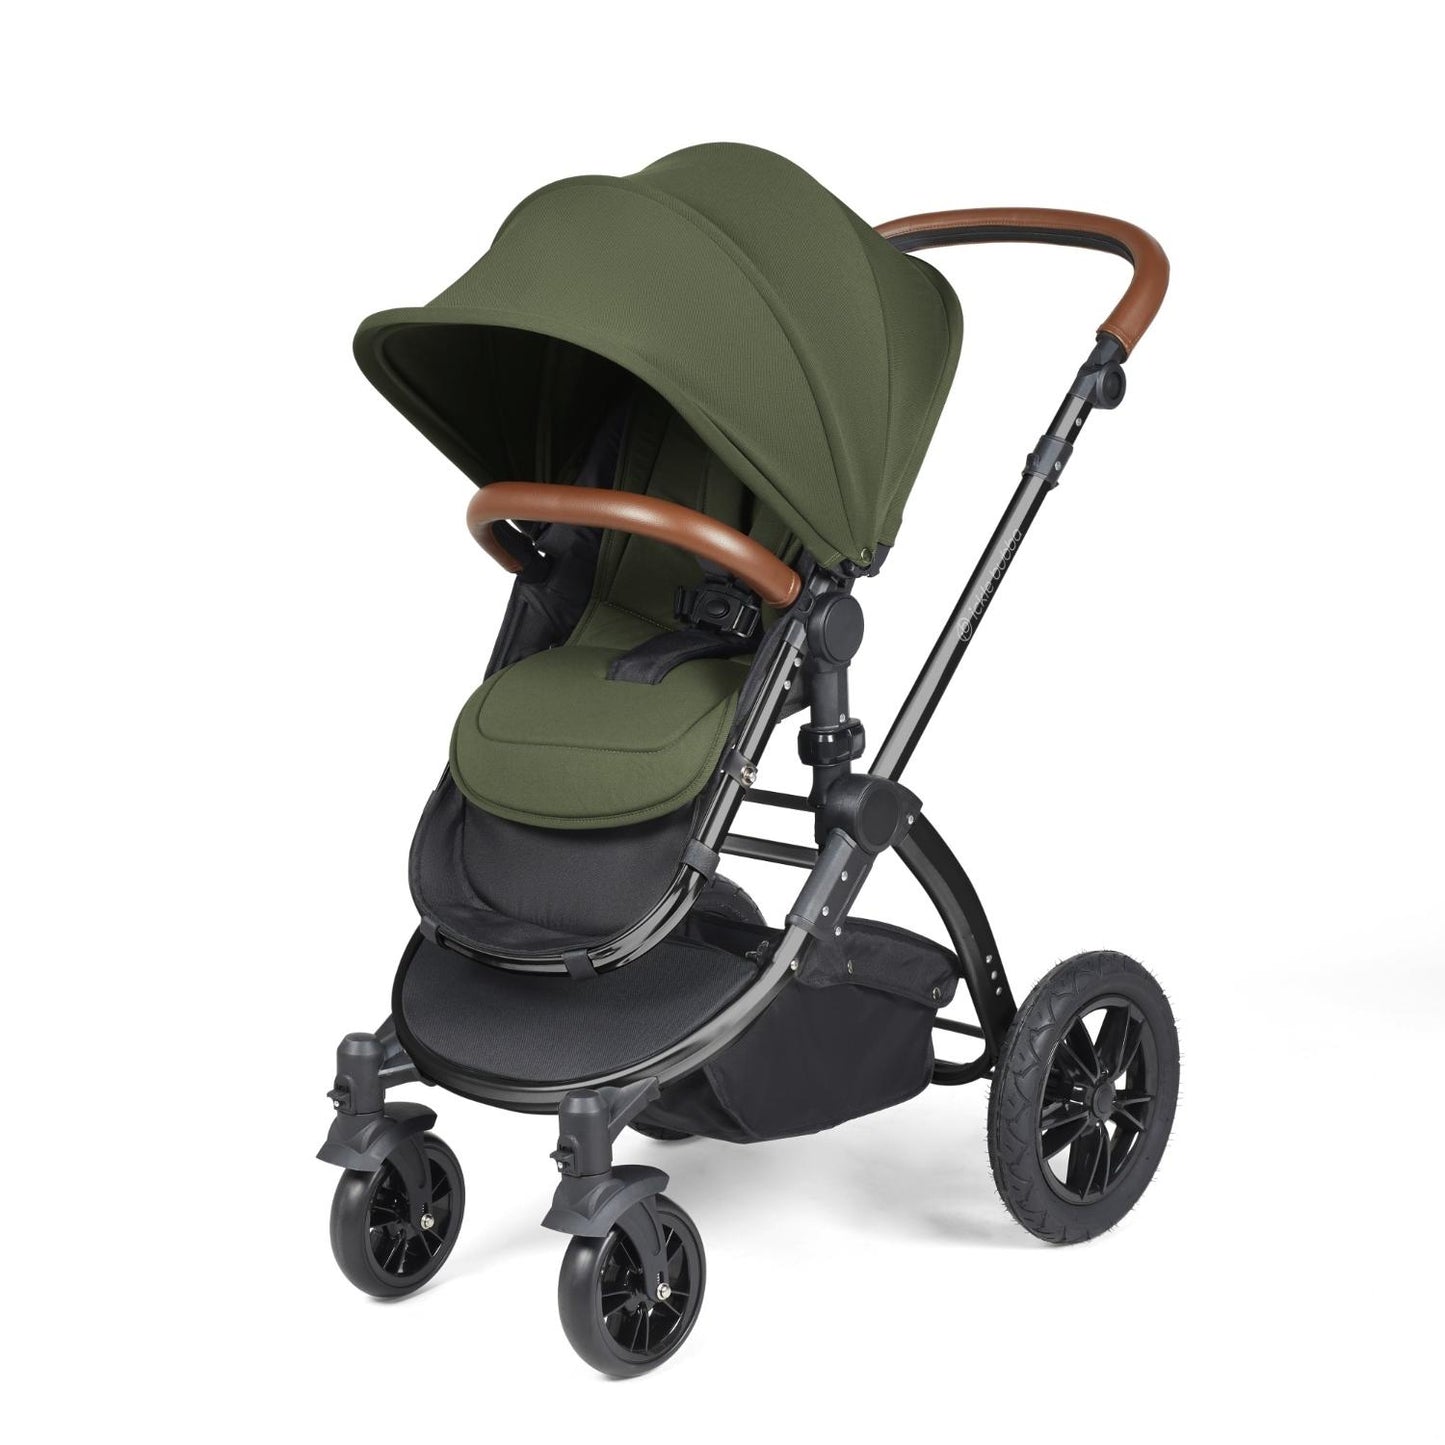 Ickle Bubba Stomp Luxe Pushchair with seat unit attached in Woodland green colour with tan handle